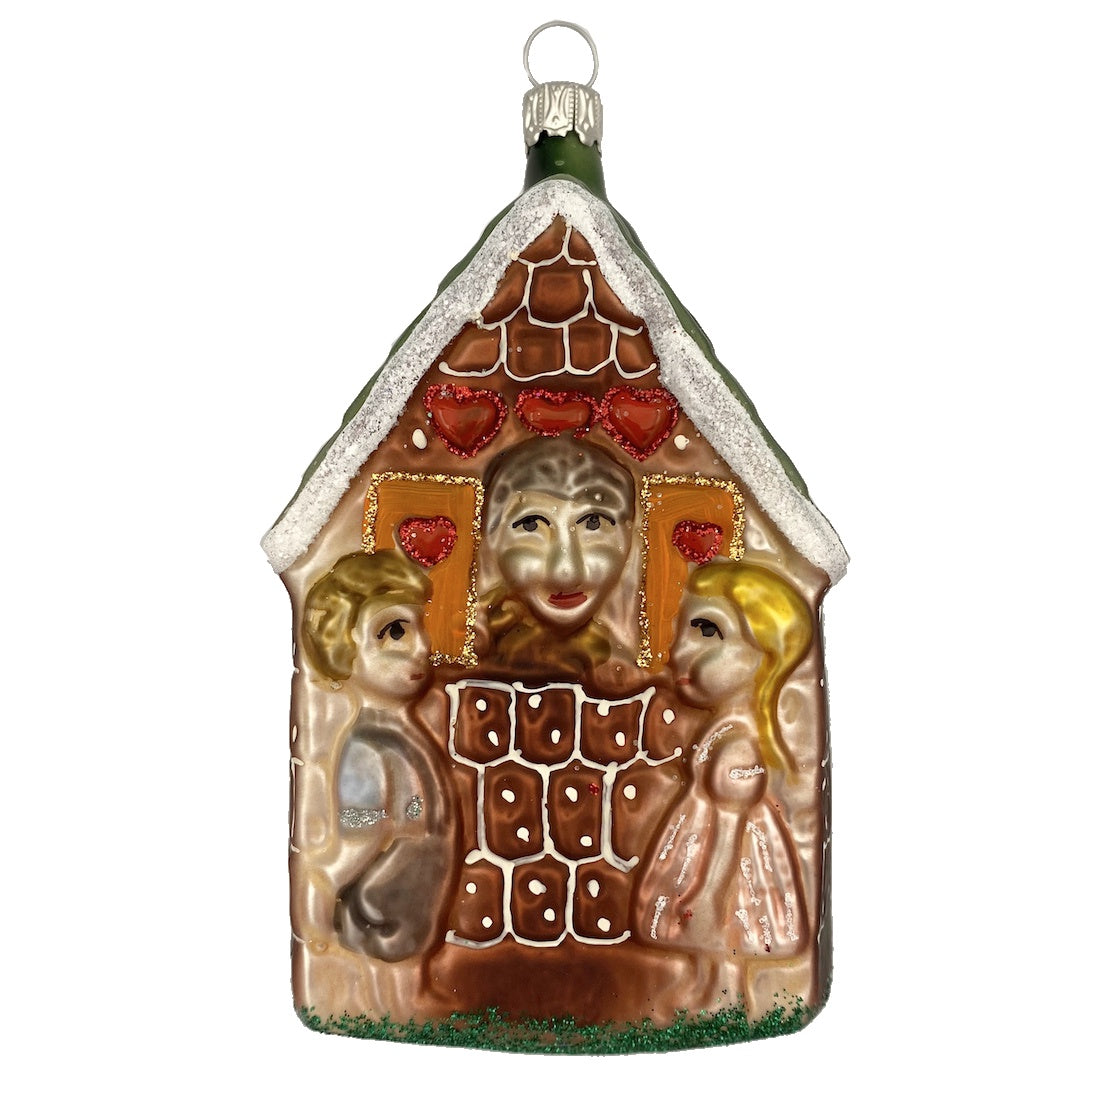 Gingerbread Haus with Hansel and Gretel by Old German Christmas